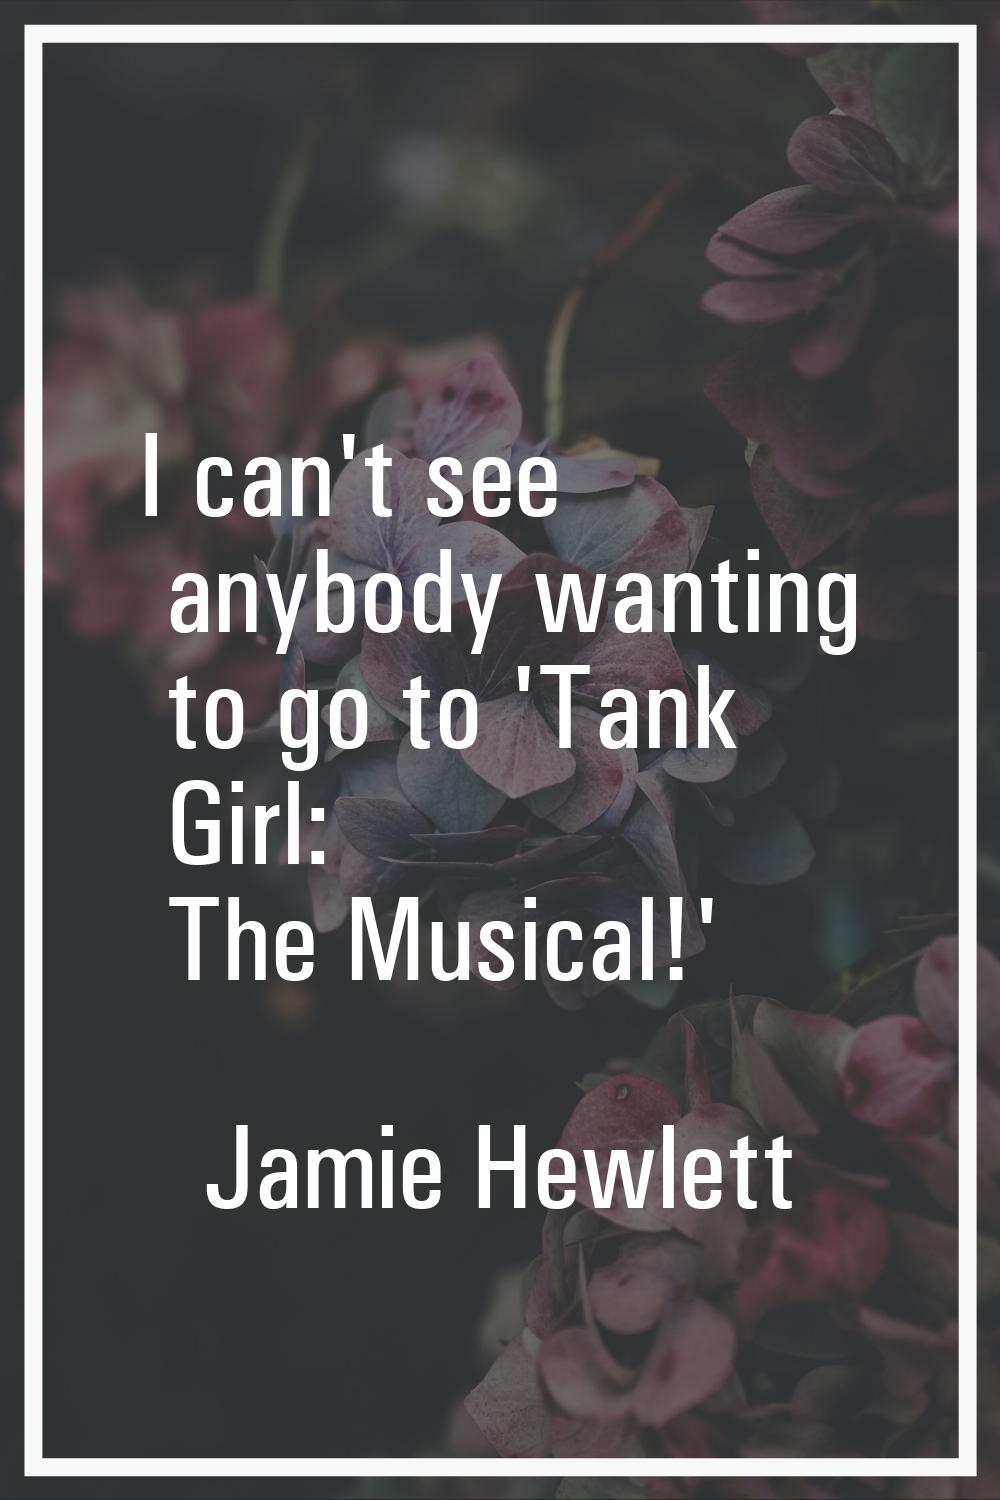 I can't see anybody wanting to go to 'Tank Girl: The Musical!'